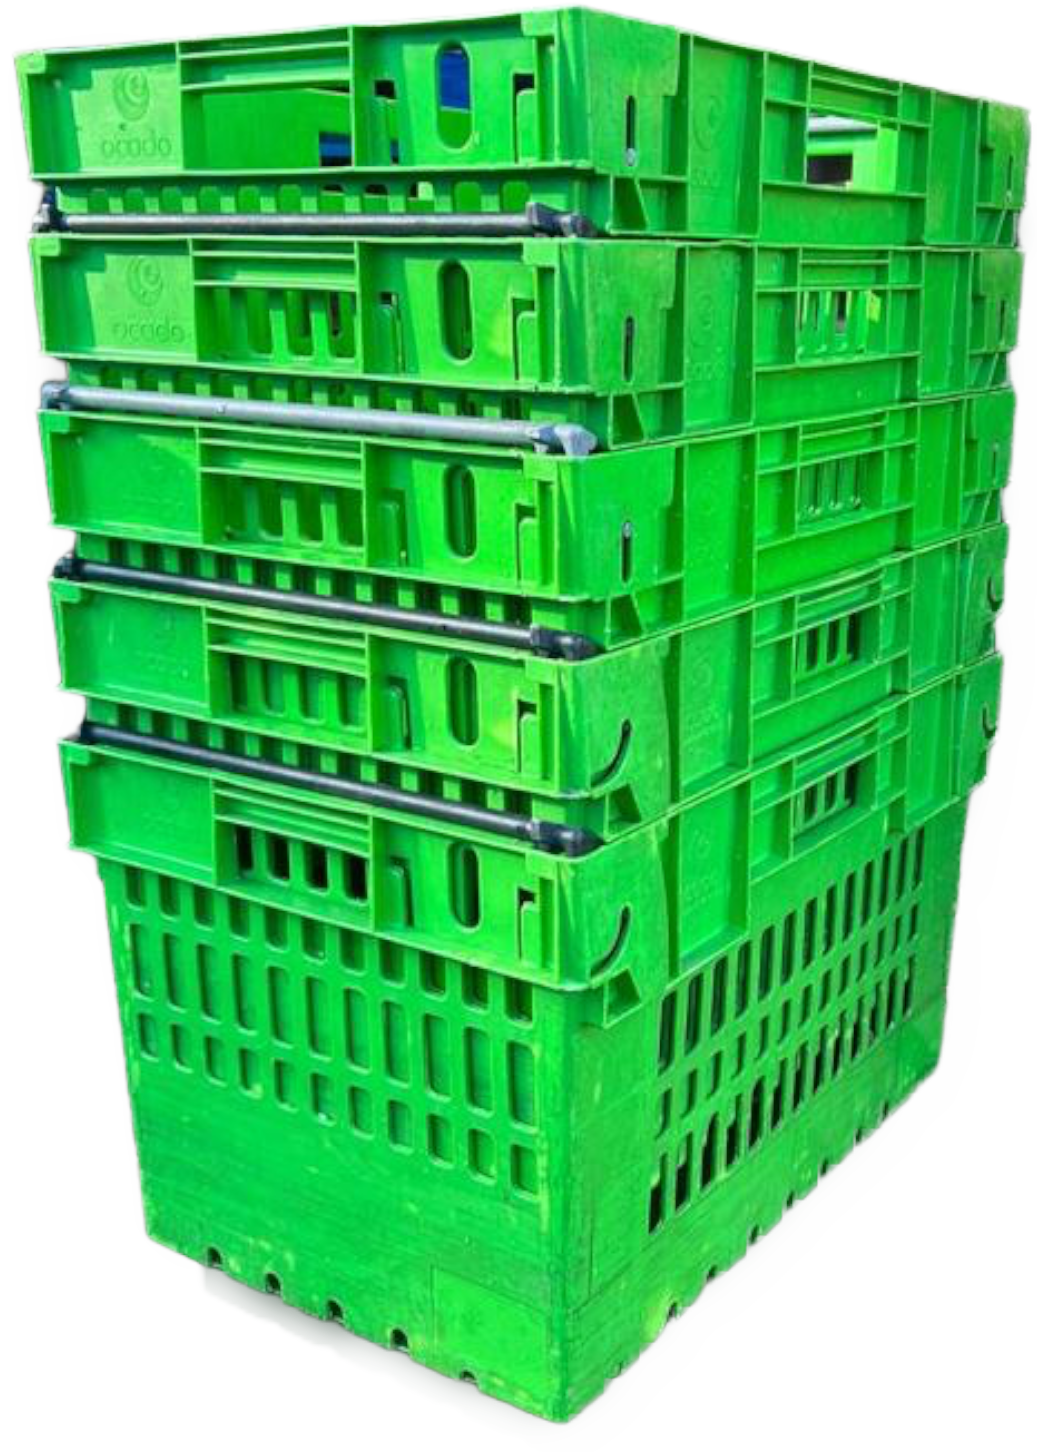 400x300x185 Bale Arm Crate - Black For Agricultural Industry